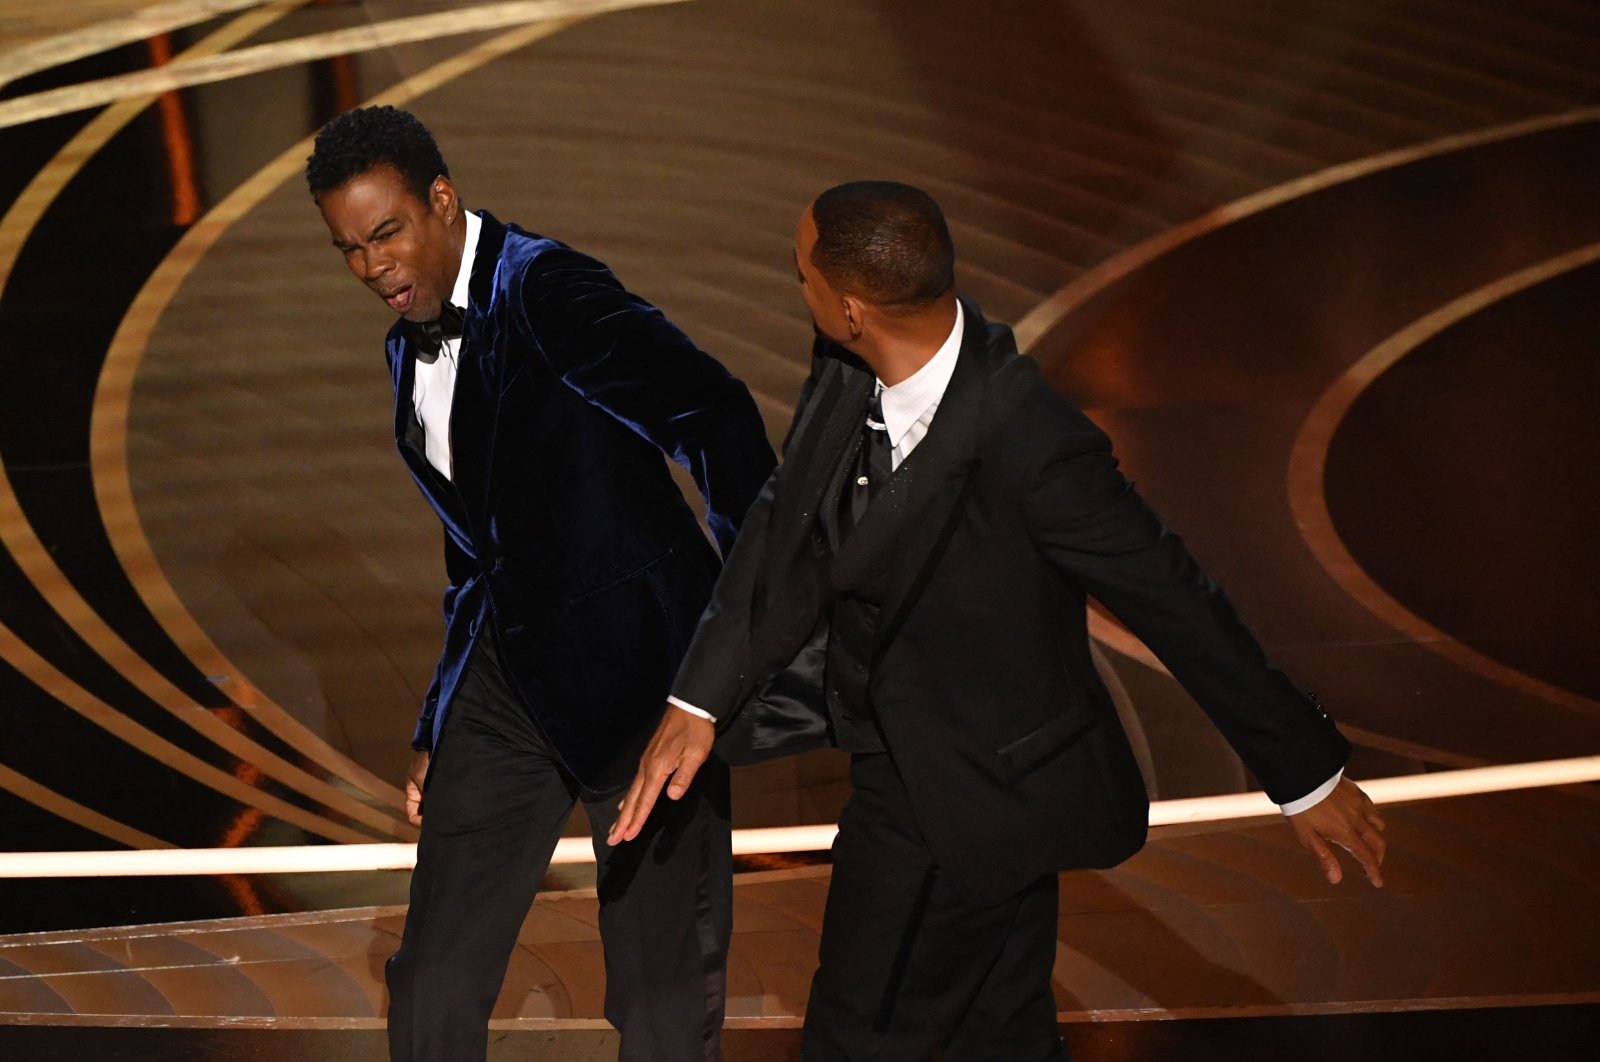 Will Smith (R) slaps Chris Rock onstage during the 94th Oscars at the Dolby Theater in Hollywood, California, U.S., March 27, 2022. (AFP Photo)